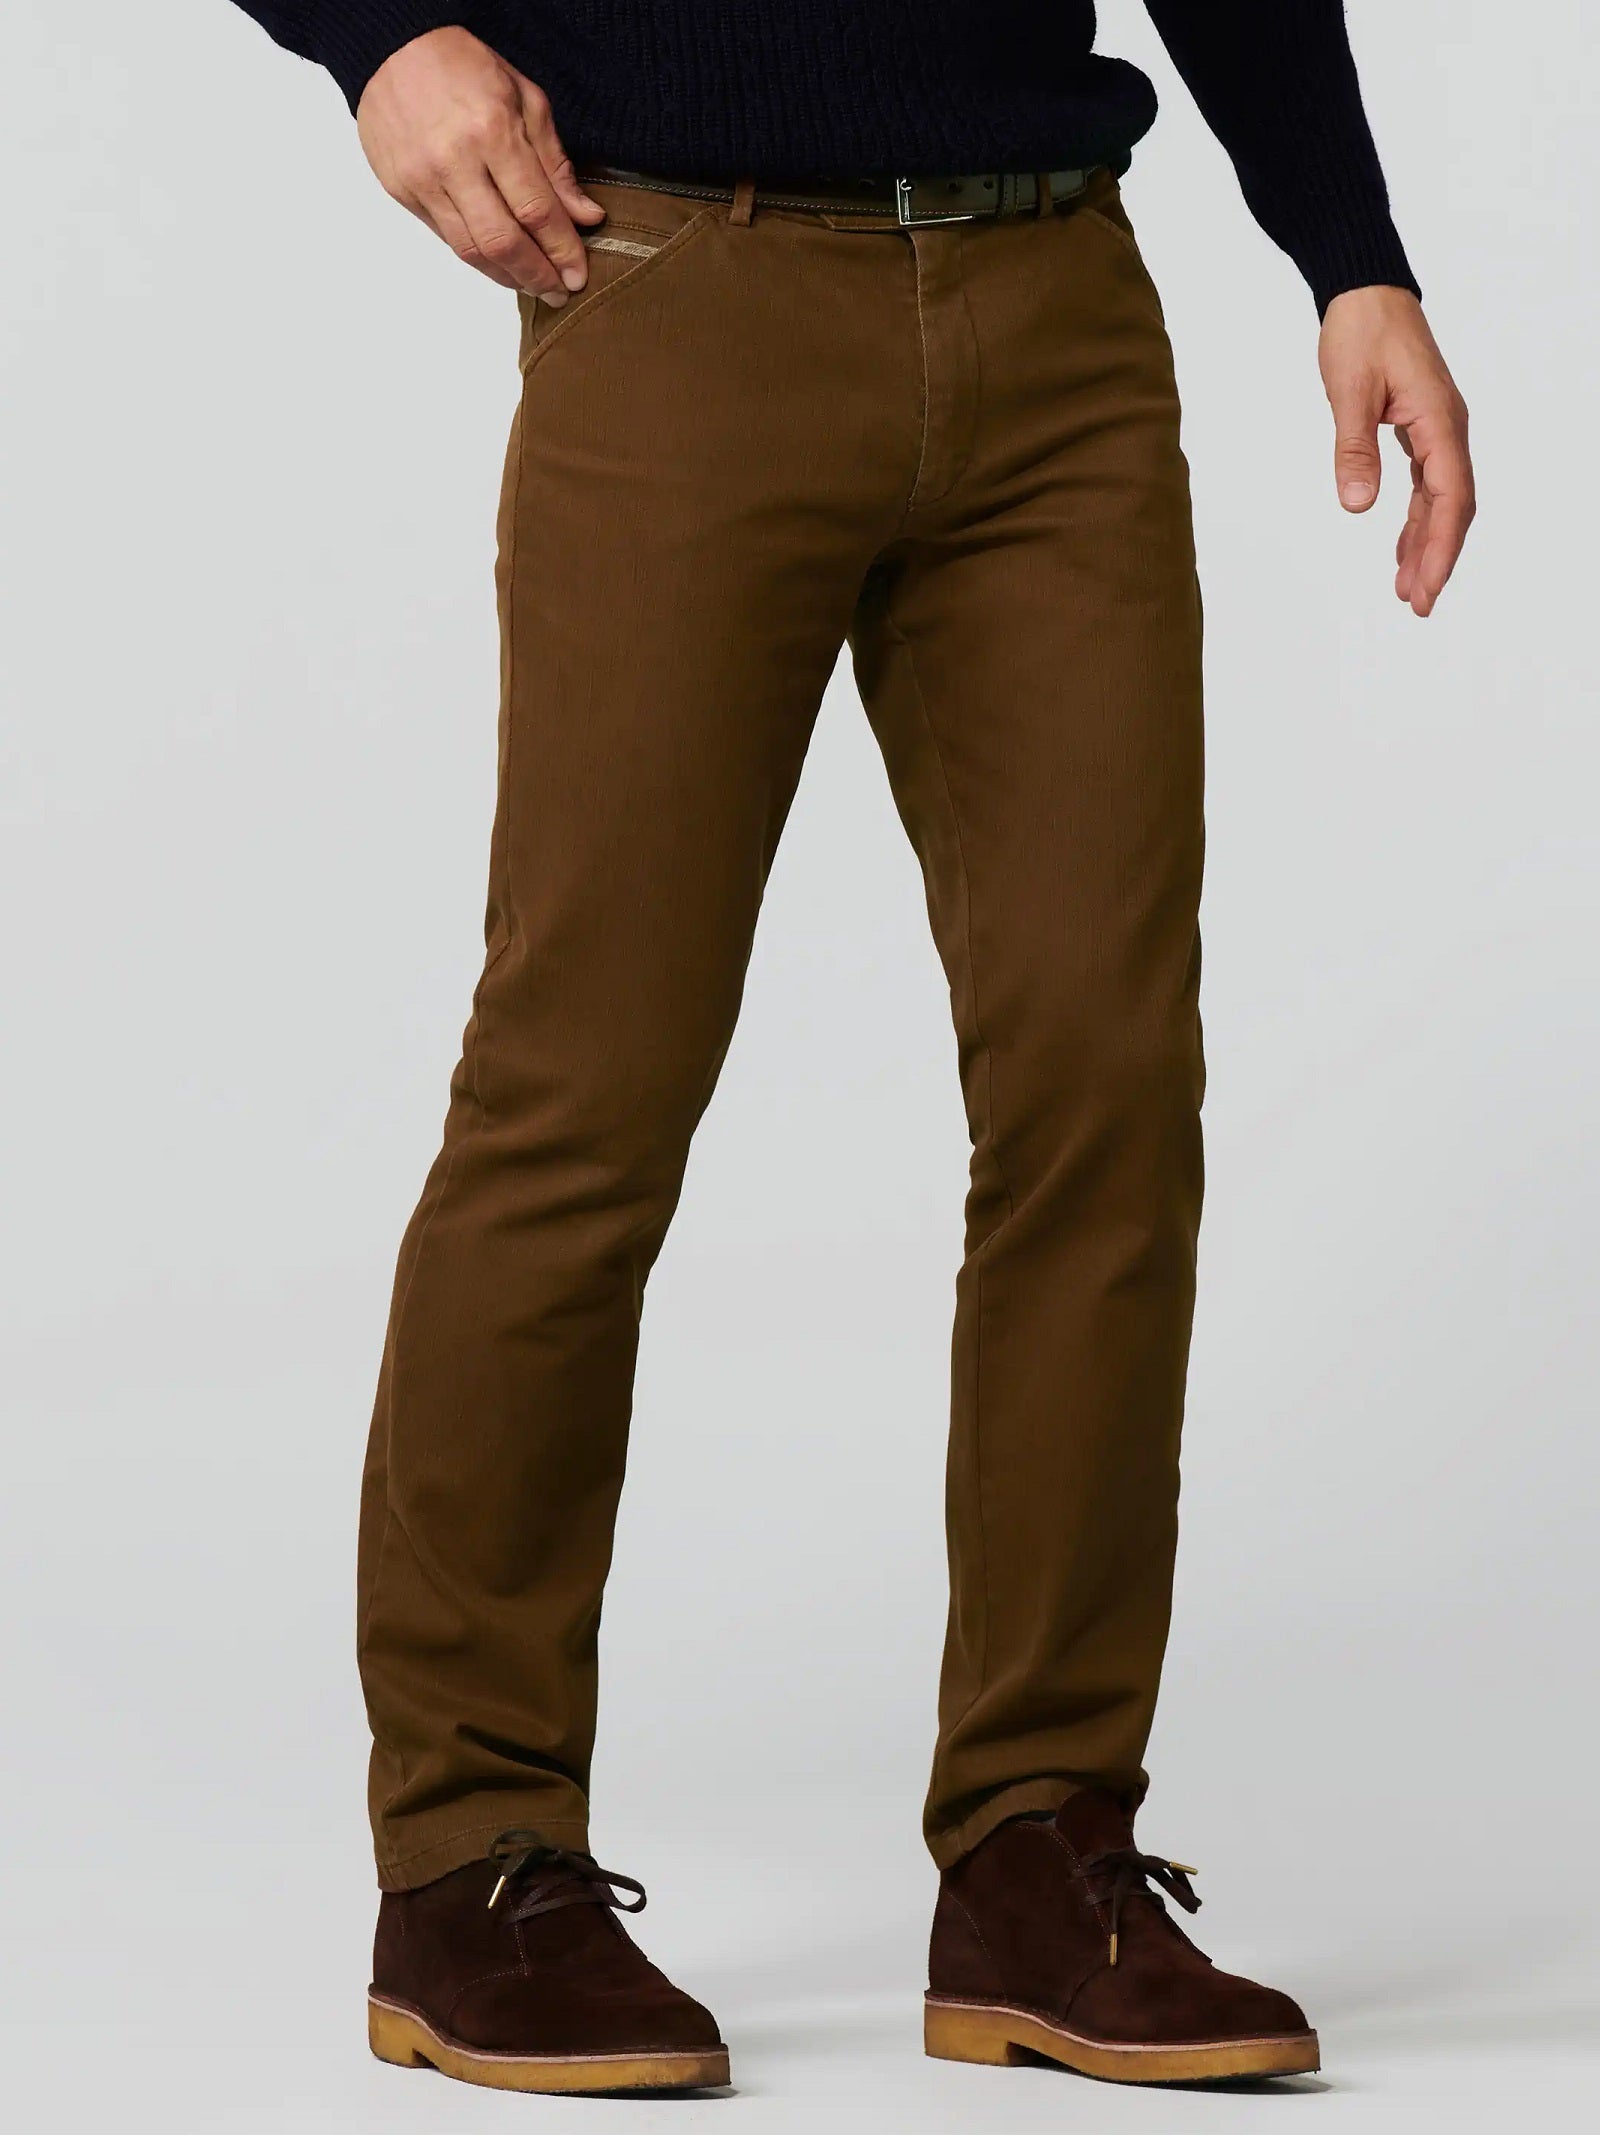 40% OFF - MEYER Trousers - Chicago 5606 Micro Structure Cotton Chinos - Caramel